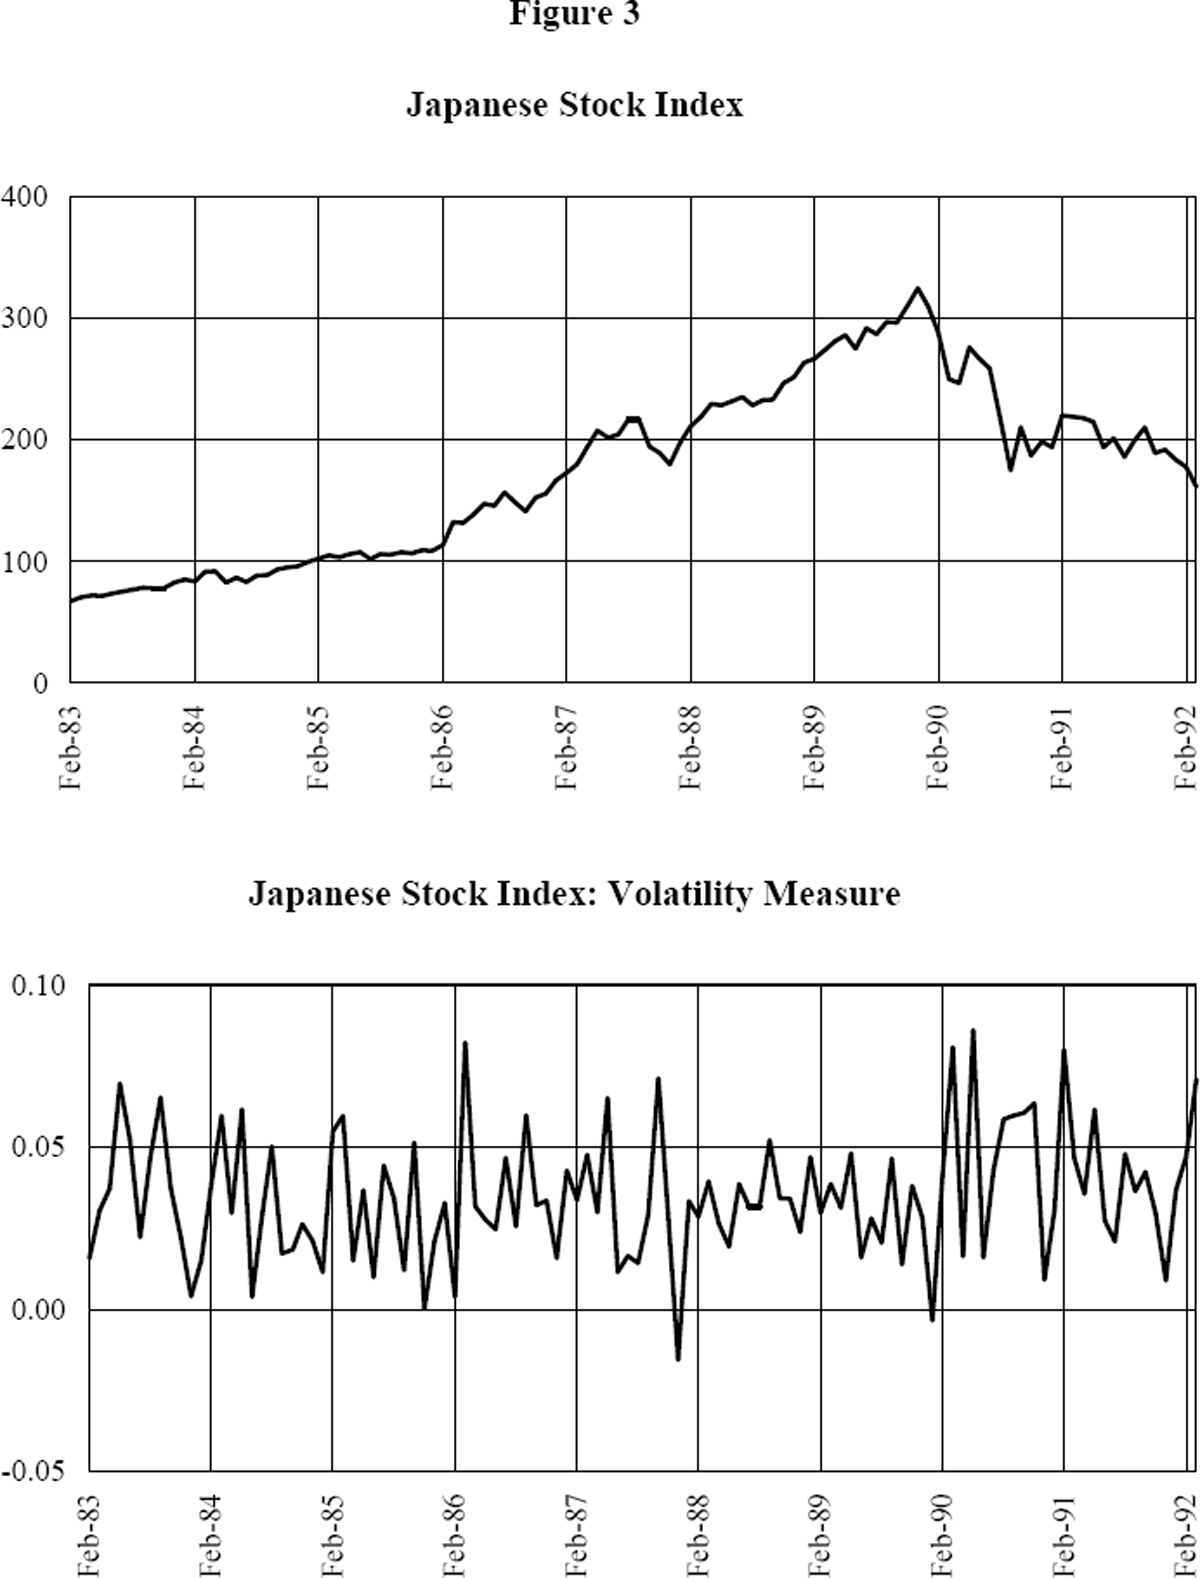 Figure 3: Japanese Stock Index and Volatility Measure